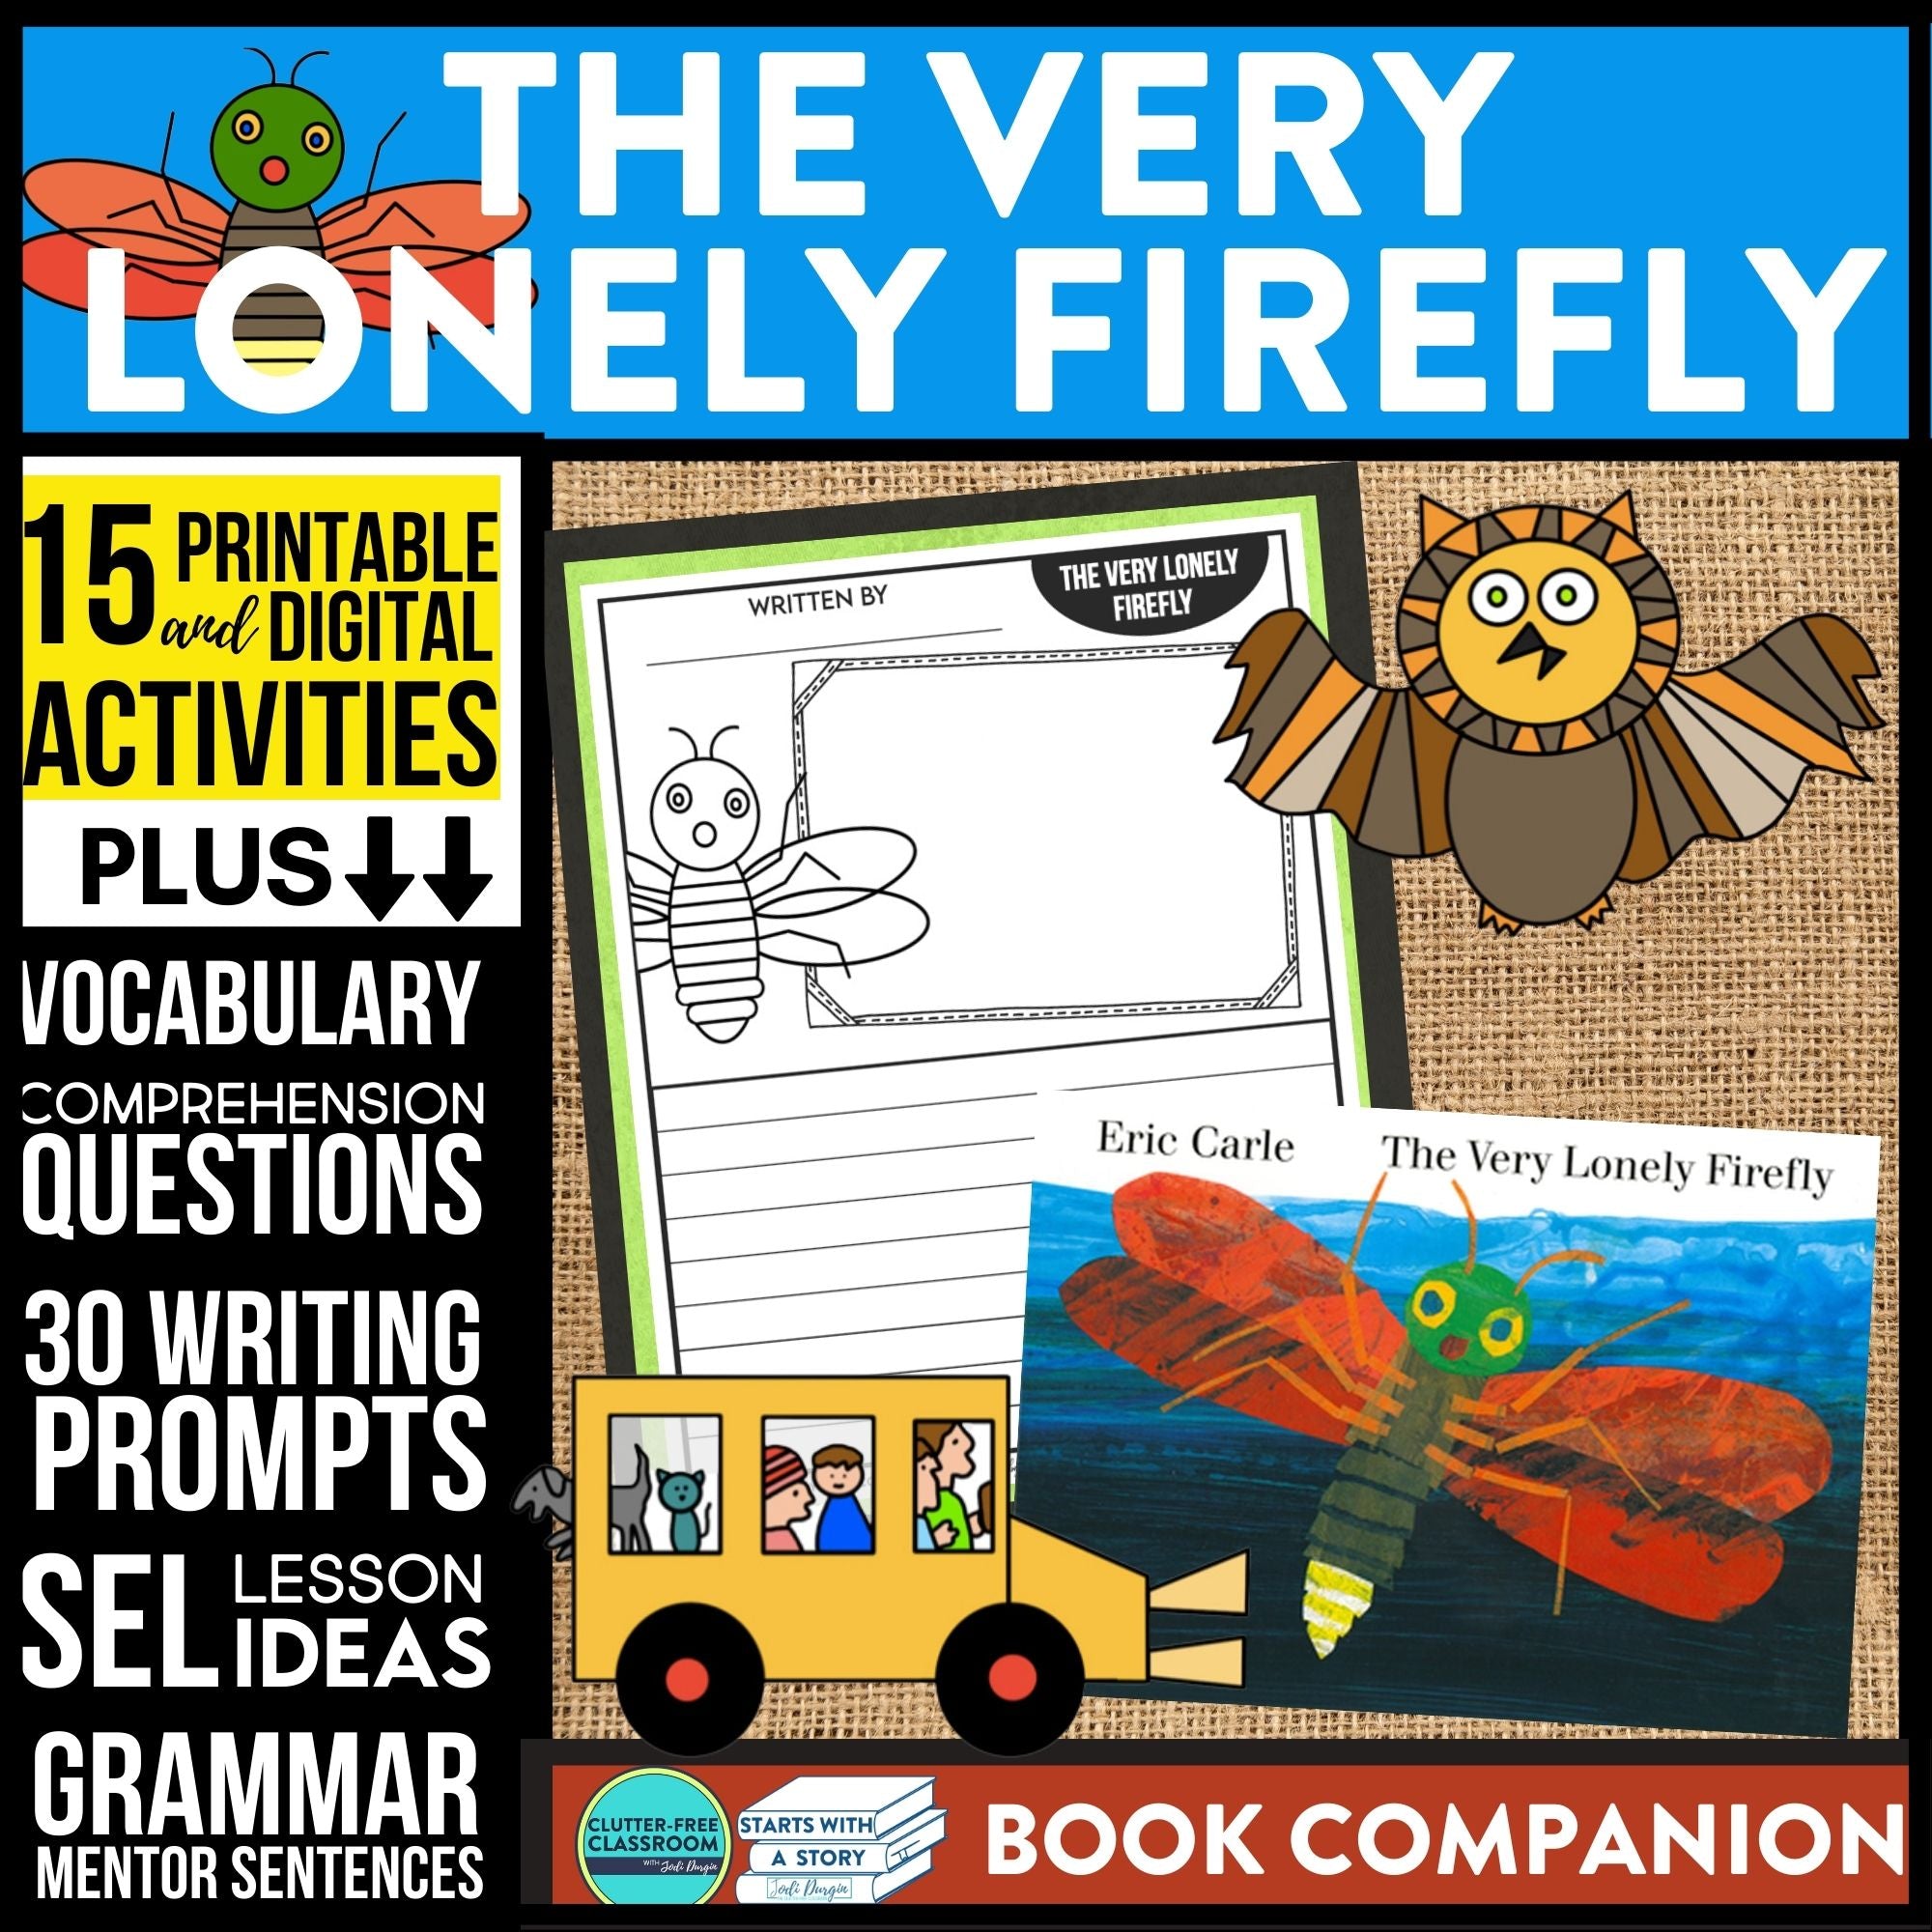 THE VERY LONELY FIREFLY activities and lesson plan ideas